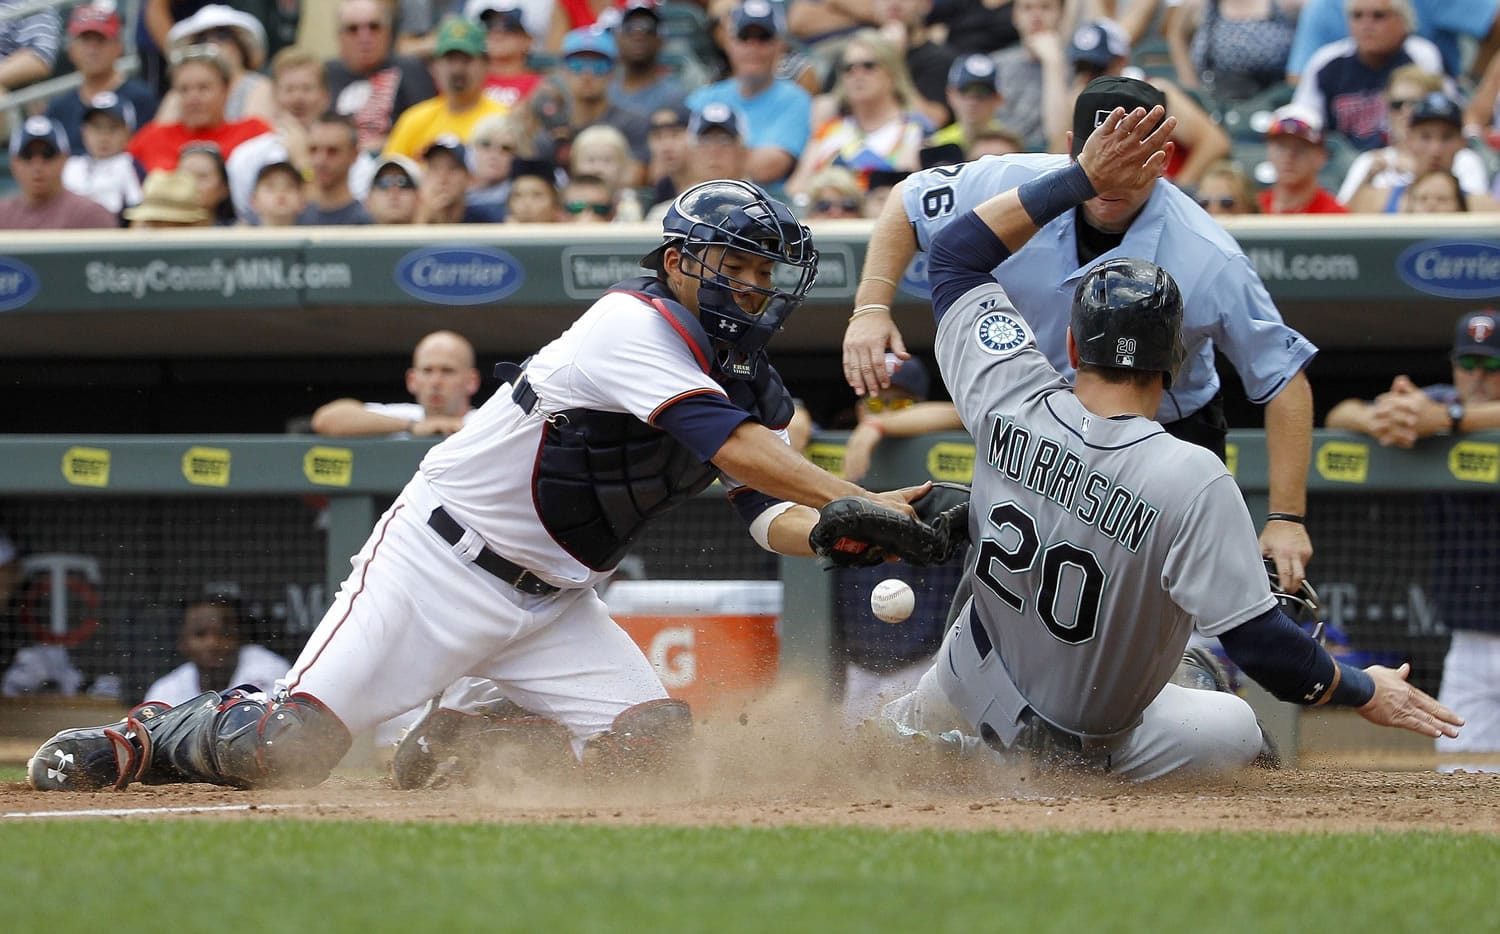 Seattle Mariners' Logan Morrison, right, scores on a single by Mariners' Austin Jackson as Minnesota Twins catcher Kurt Suzuki, left, bobbles the throw from left field during the 11th inning Sunday at Minneapolis. The Mariners won 4-1.